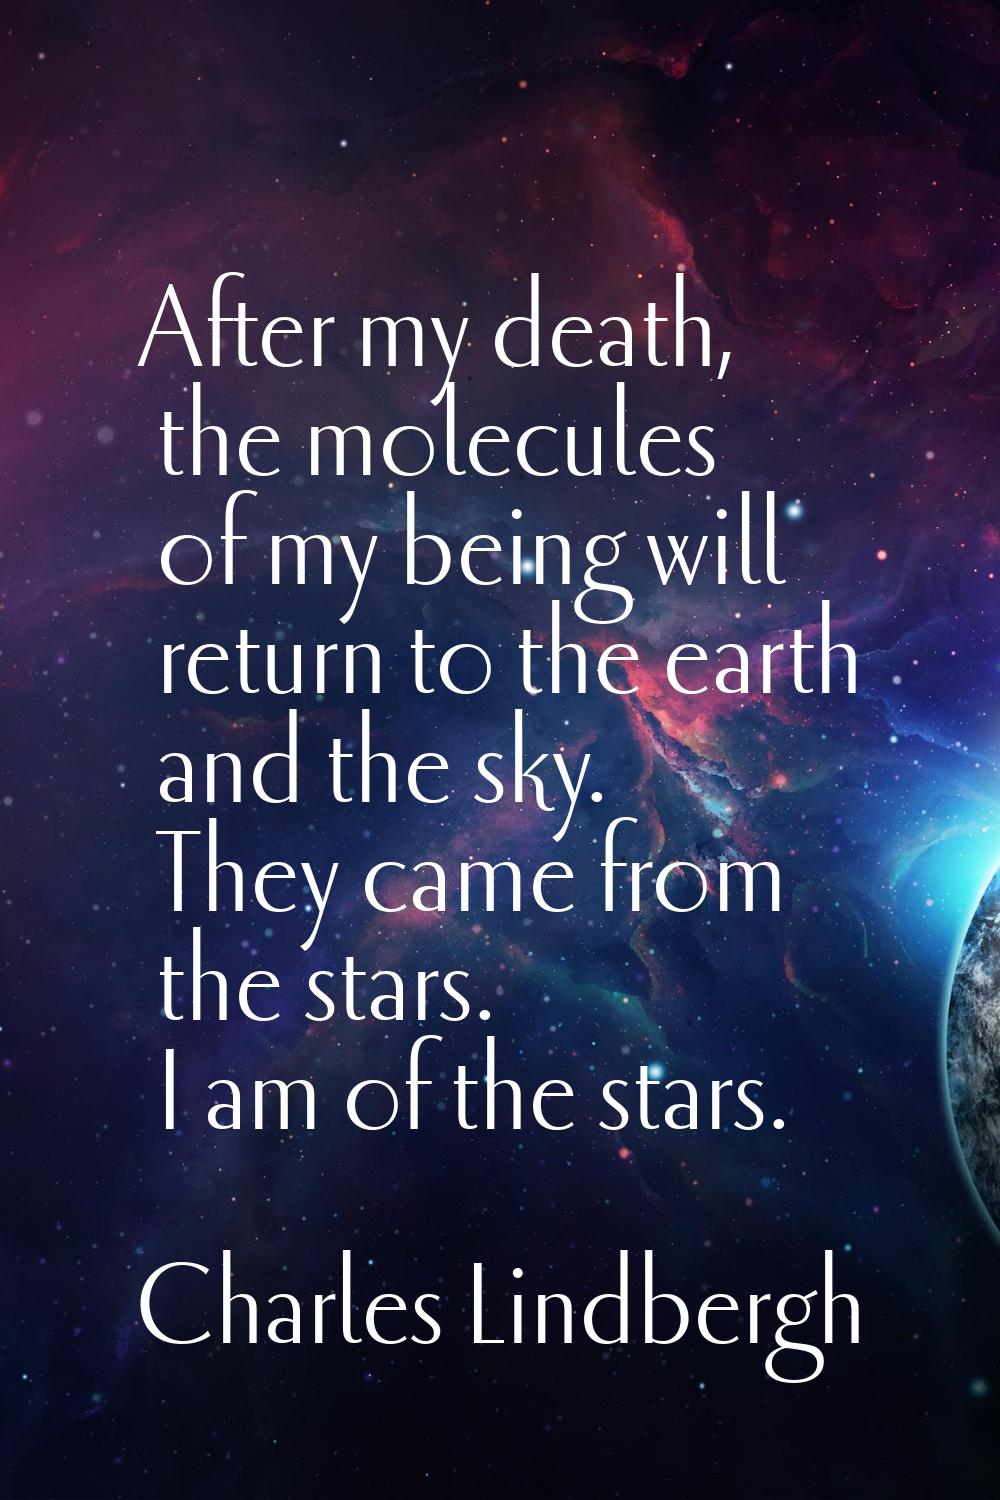 After my death, the molecules of my being will return to the earth and the sky. They came from the 